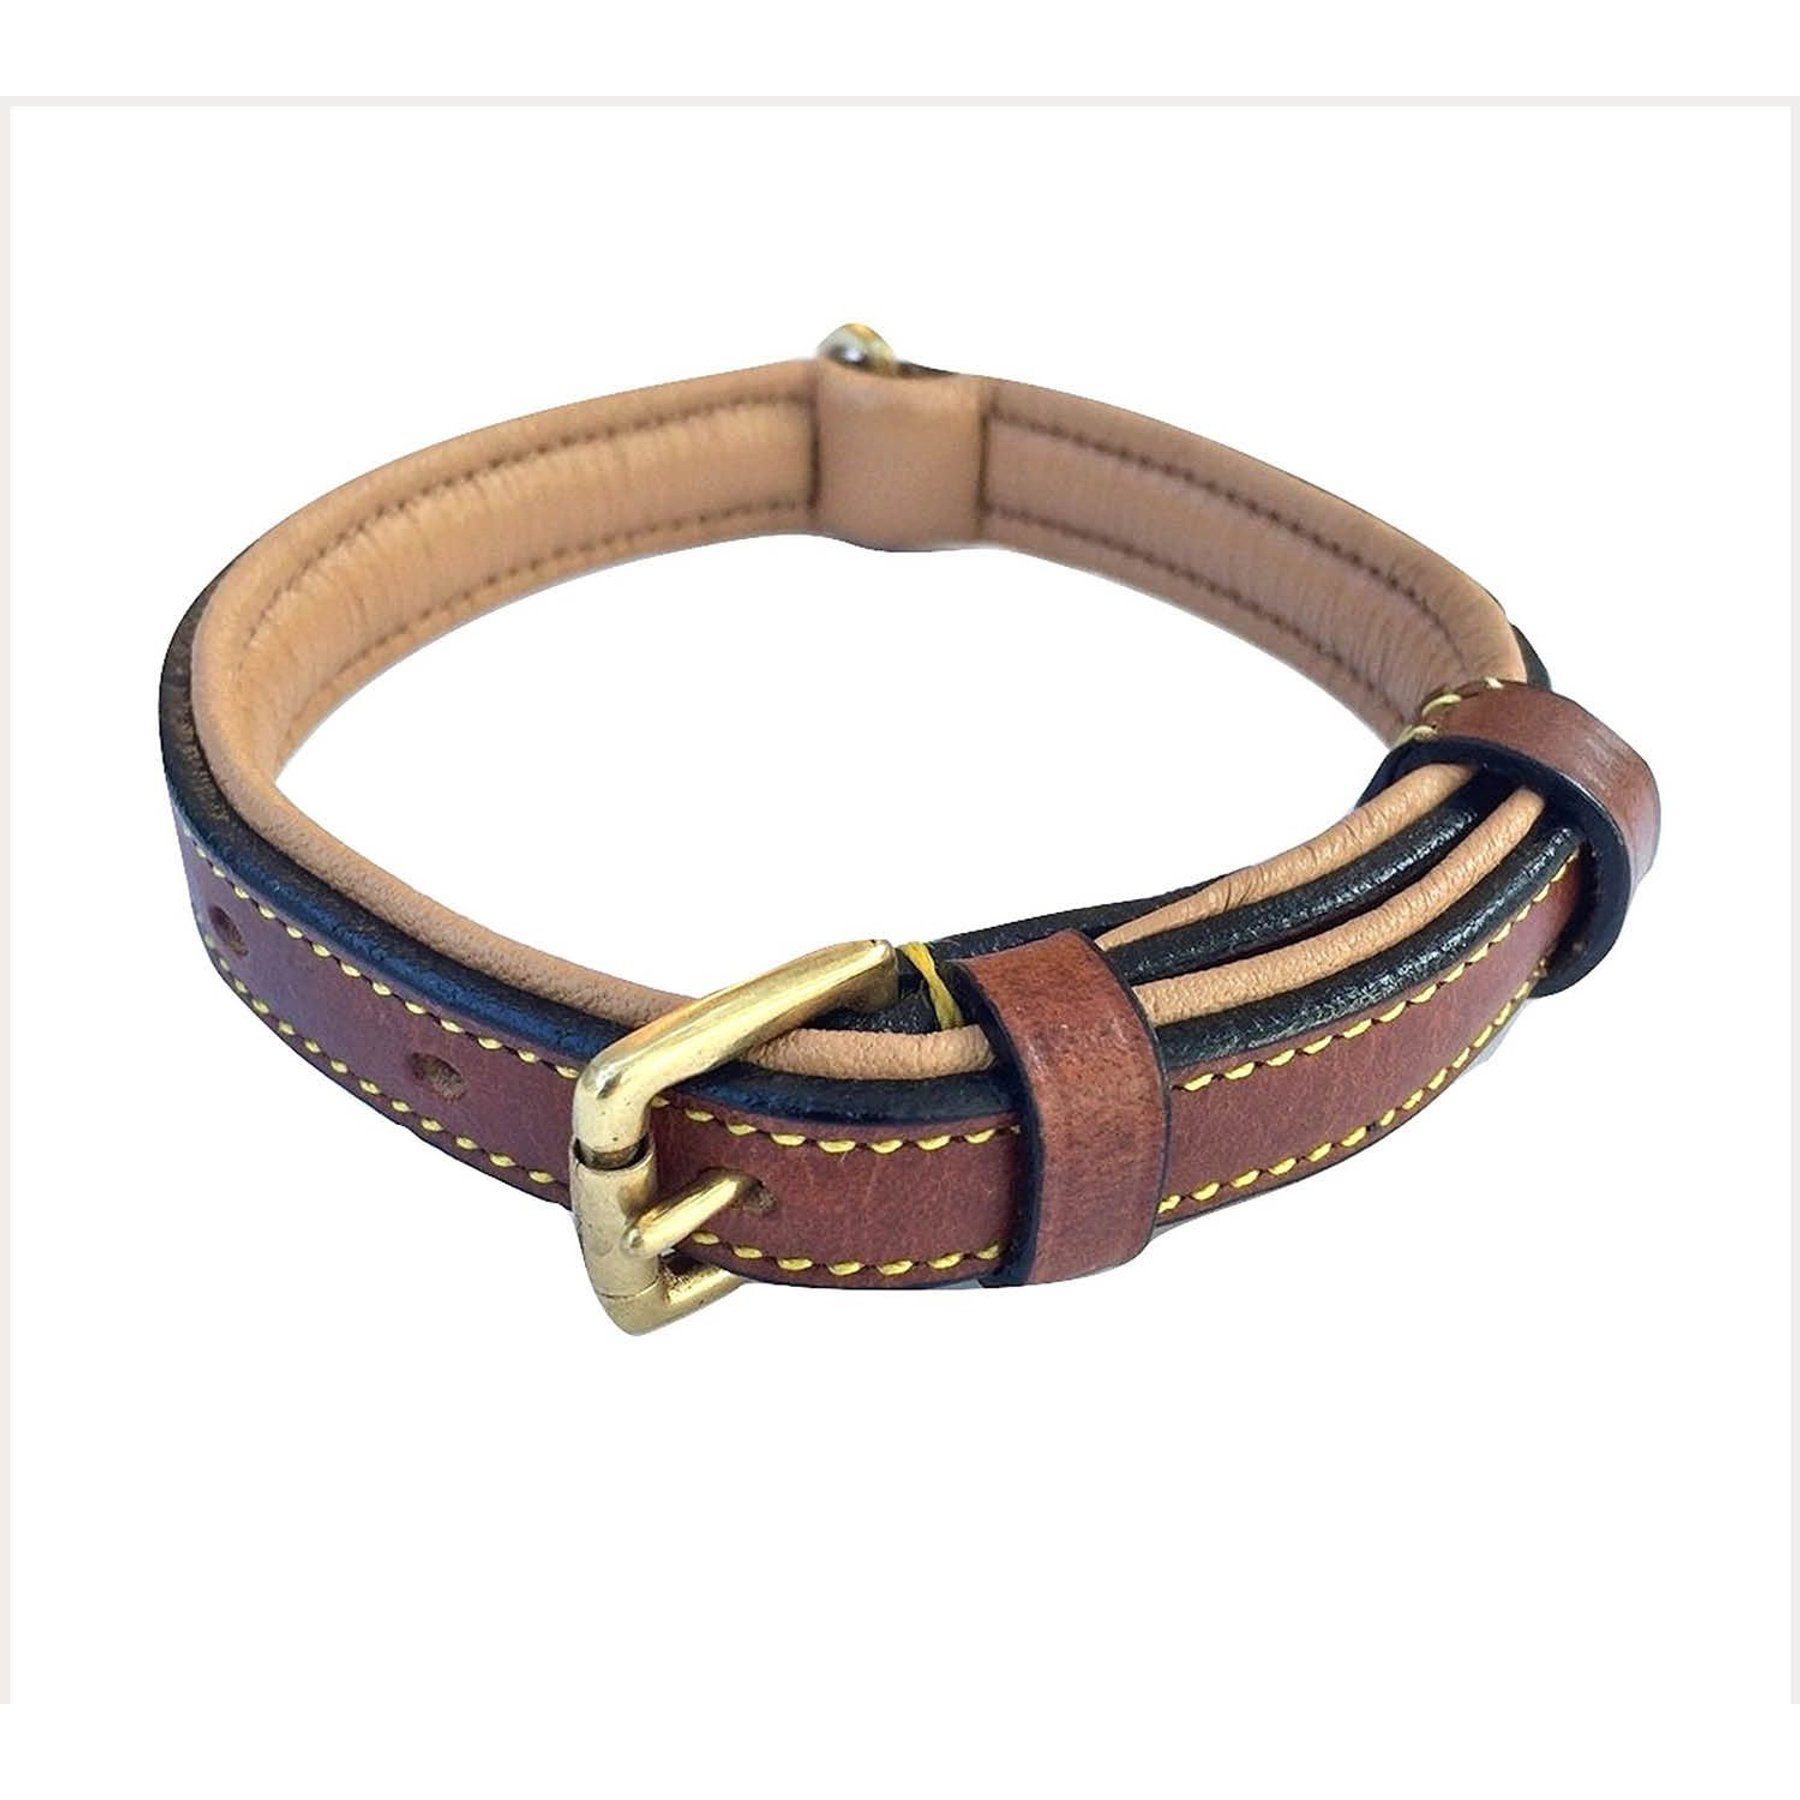 SOFT TOUCH COLLARS Leather Two-Tone Padded Dog Collar, Brown, Medium ...